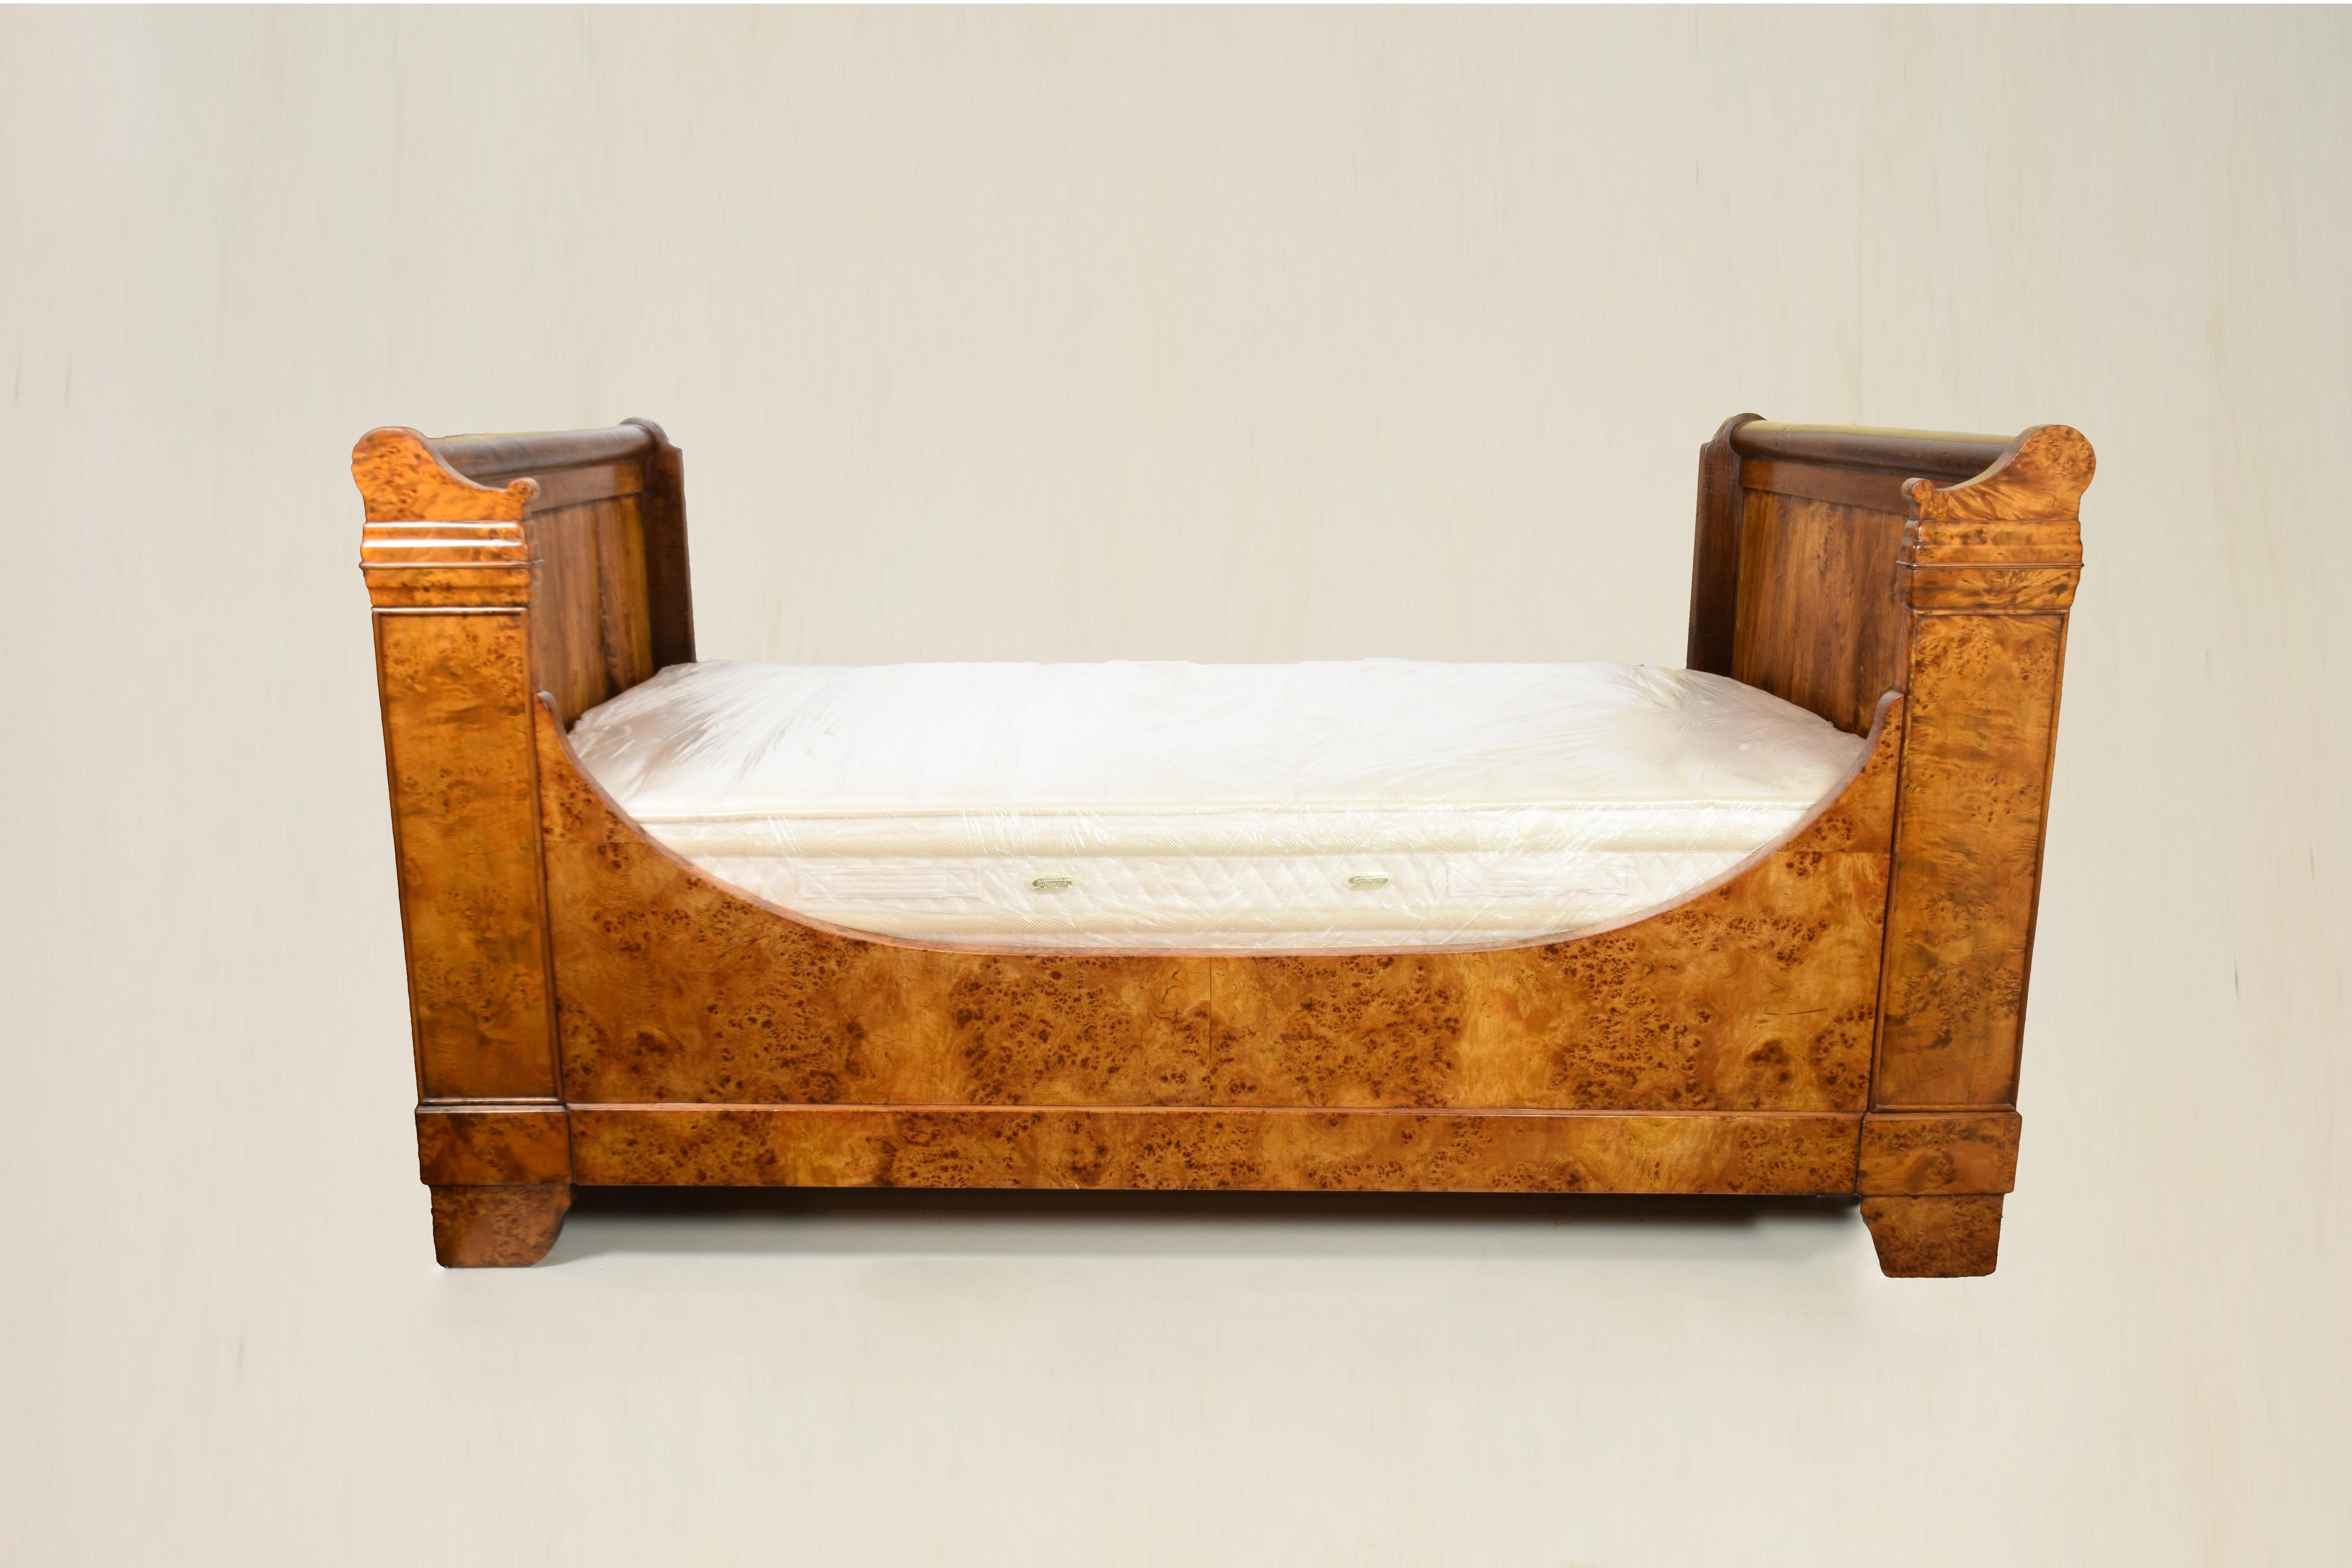 Piemonte, Italy, mid-19th century
In poplar, walnut and poplar burl.
Very good condition
Dimensions: 115 x 207 x 110 cm
Complete with mattress (Simmons brand) and very little used slatted base (105 x 190 cm).